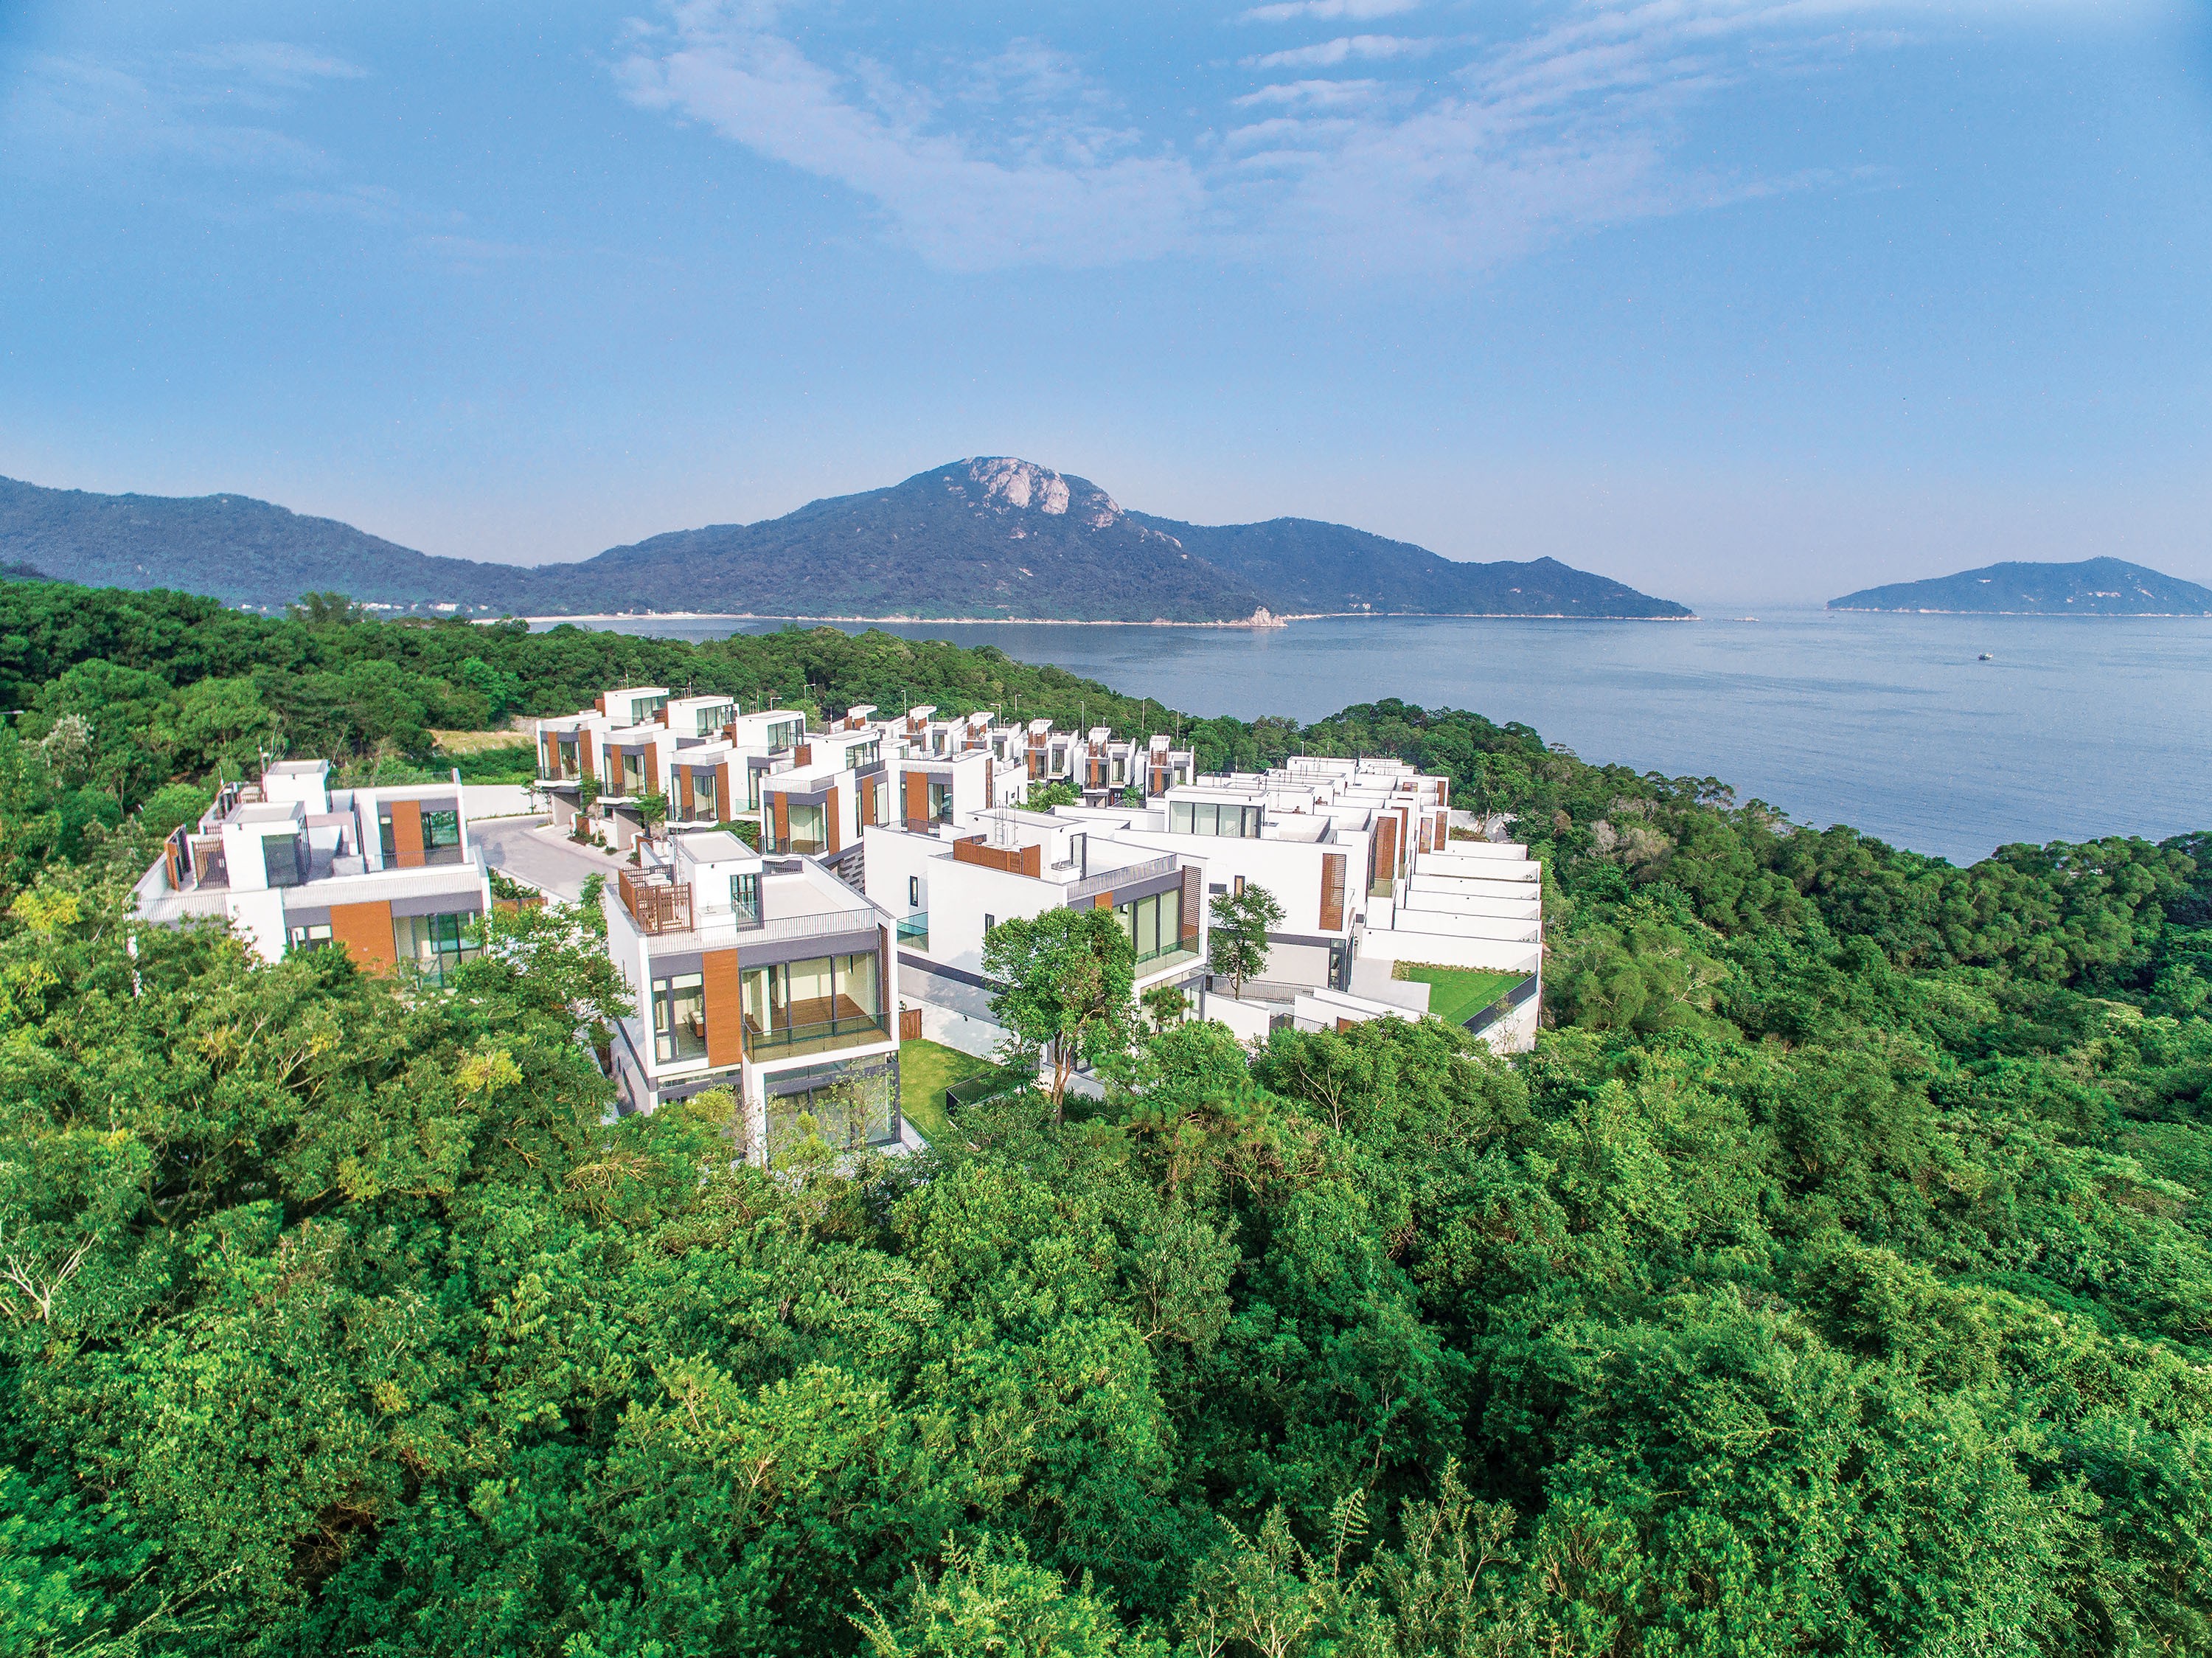 Whitesands, opposite Cheung Sha beach, is in a beautiful location, close to pristine beaches and scenic hiking trails.